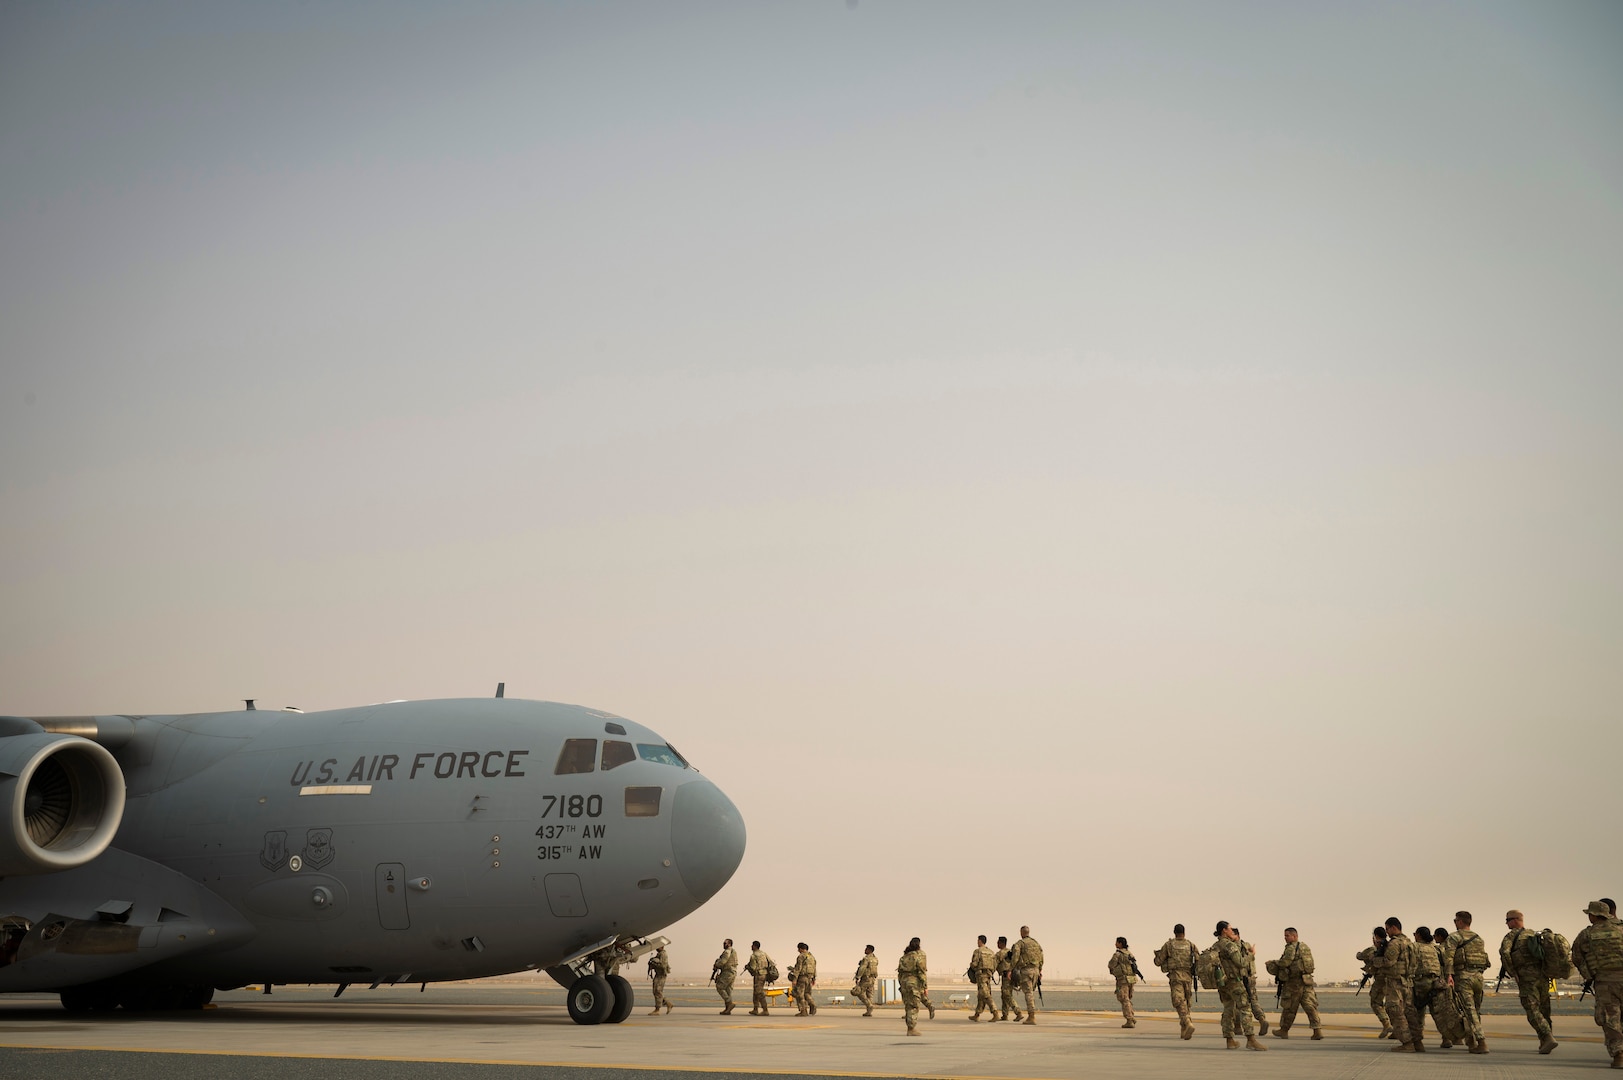 U.S. Army Task Force Griz Soldiers from the 1st Combined Arms Battalion, 163rd Cavalry Regiment, board a C-17 Globemaster III during an Emergency Deployment Rapid Exercise at Ali Al Salem Air Base, Kuwait, August 10, 2022. This exercise tested the ability for more than 120 Soldiers to report to Ali Al Salem Air Base within a short notice, and for Airmen to be able to quickly process the Soldiers and rapidly transport them to the needed location with little notice. “It made me proud to be here and feel like I’m making a difference,” said Airman 1st Class Robert Berry, 386th ELRS passenger service representative. “It’s nice to know that my part matters.” (U.S. Air Force photo by Staff Sgt. Dalton Williams)